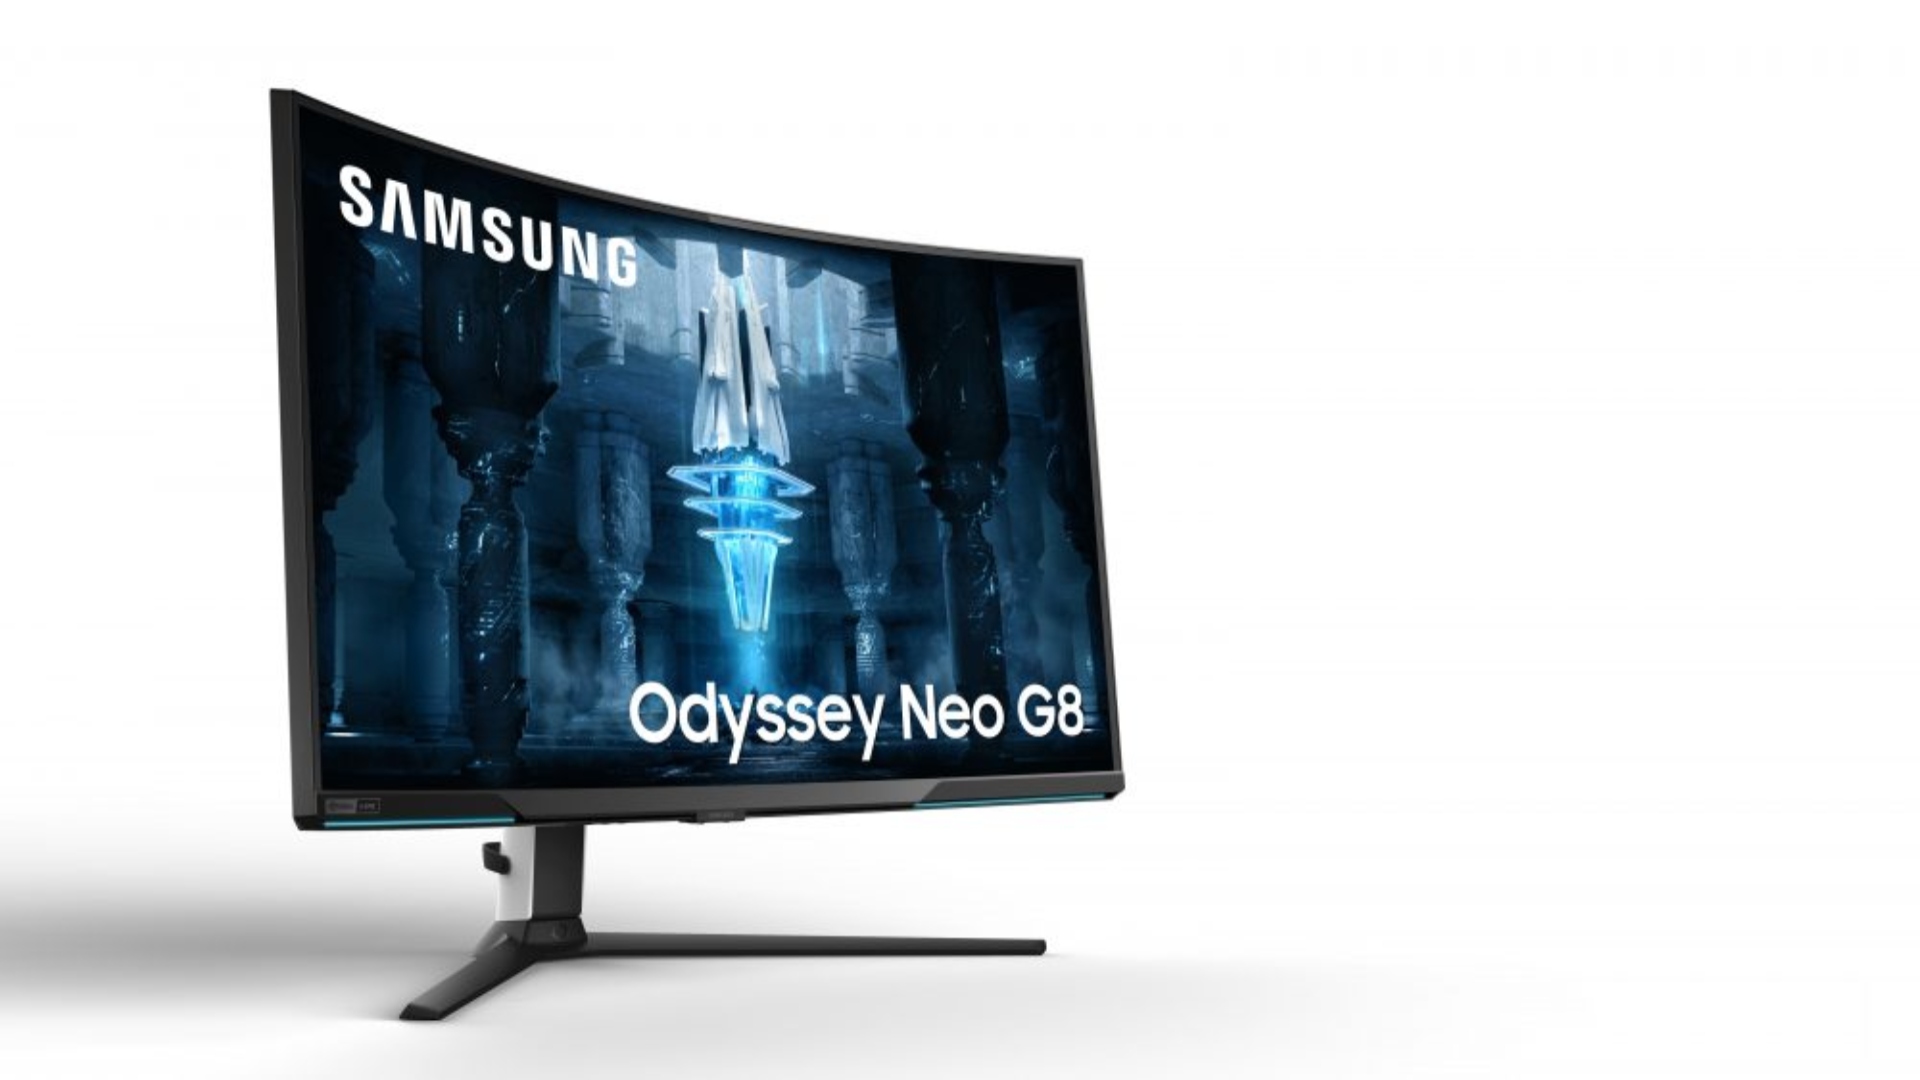 Reserve the new Samsung 4K gaming monitor and get $50 off